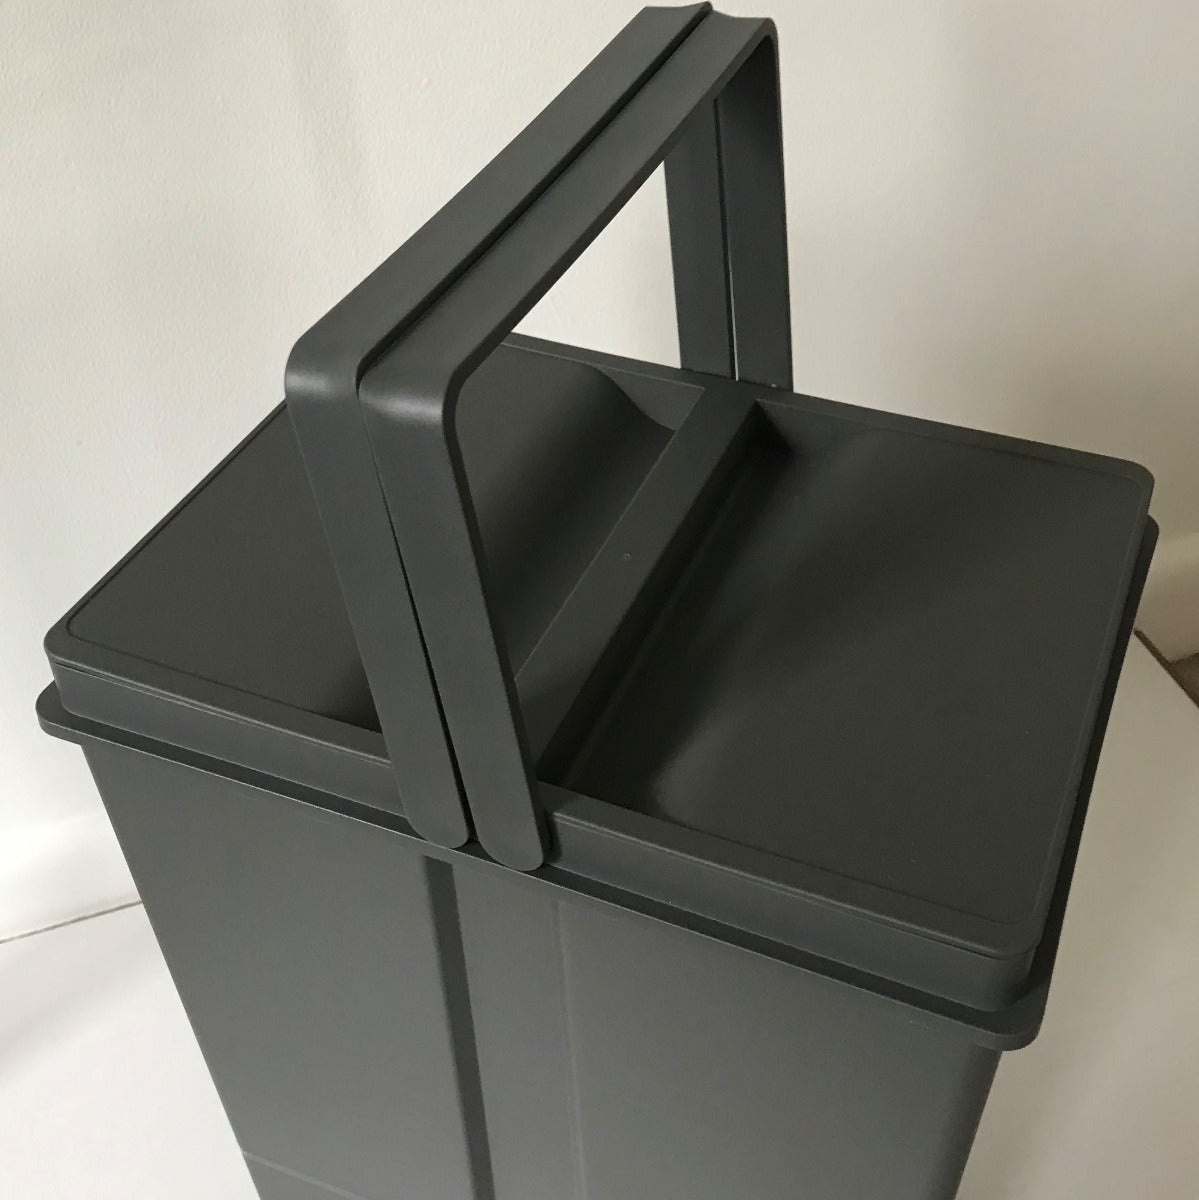 The 29L buckets come with handles and a lid